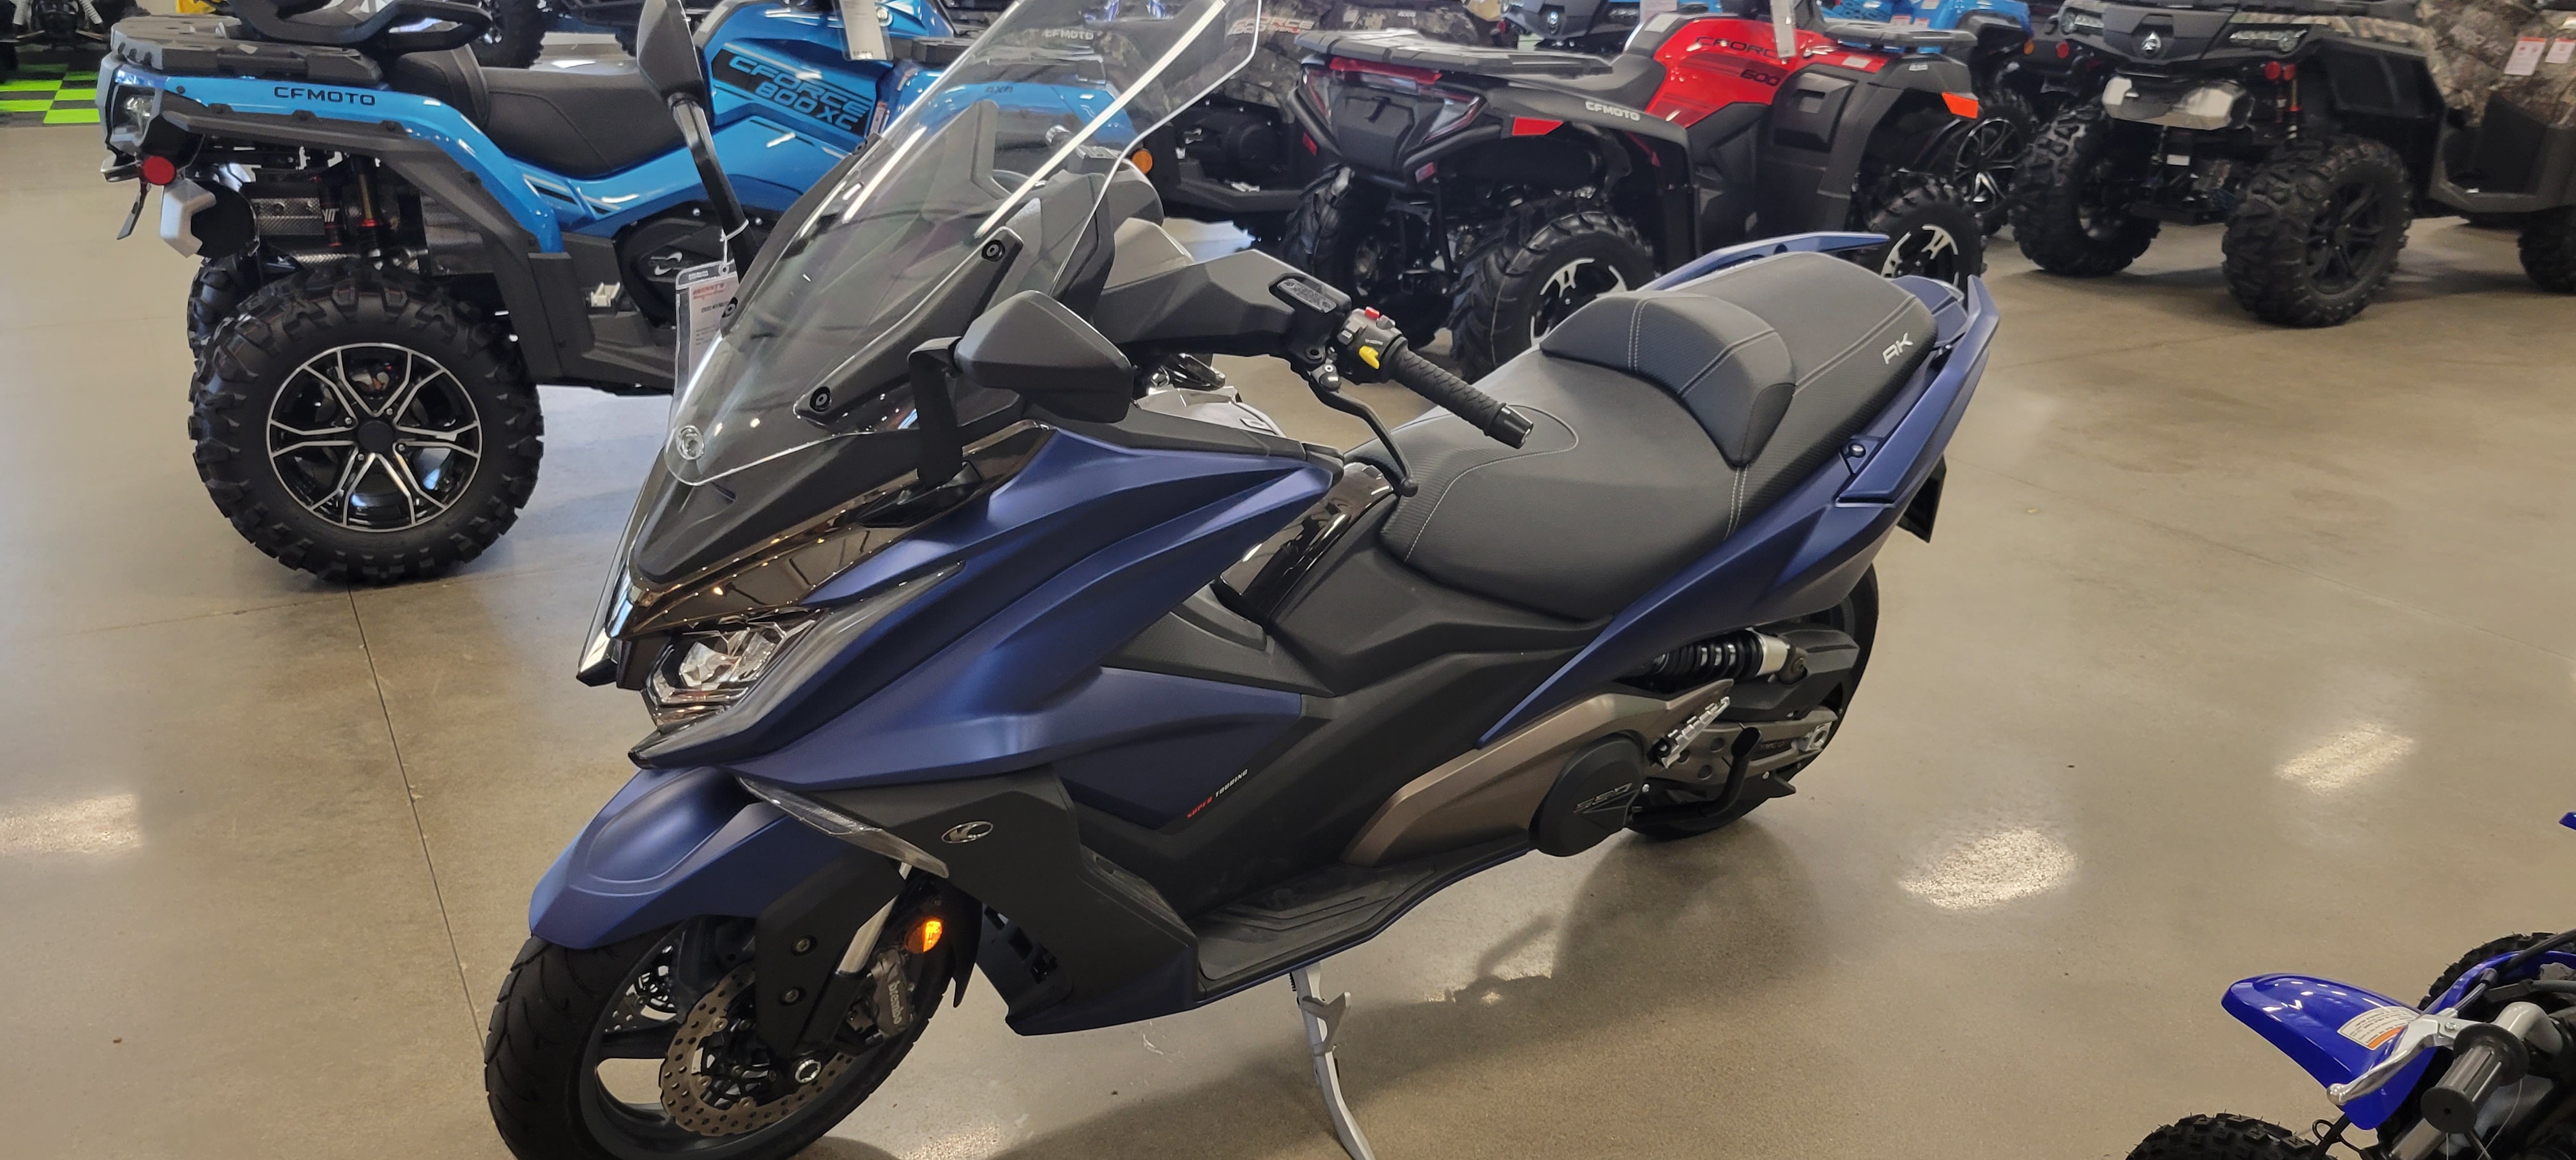 2022 KYMCO AK 550 at Brenny's Motorcycle Clinic, Bettendorf, IA 52722